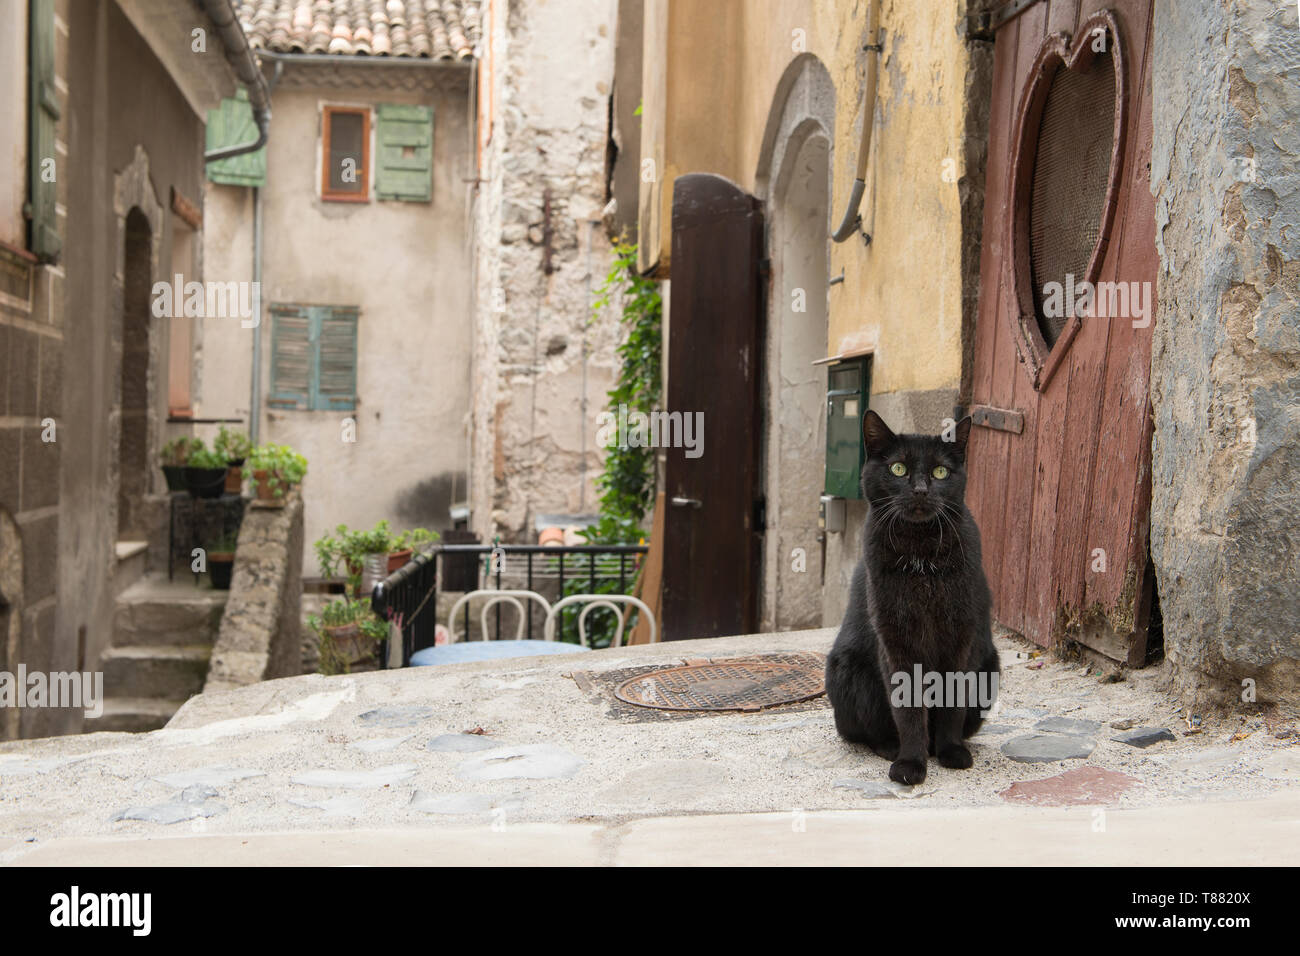 Black street cat in an old town in the provance of France Stock Photo